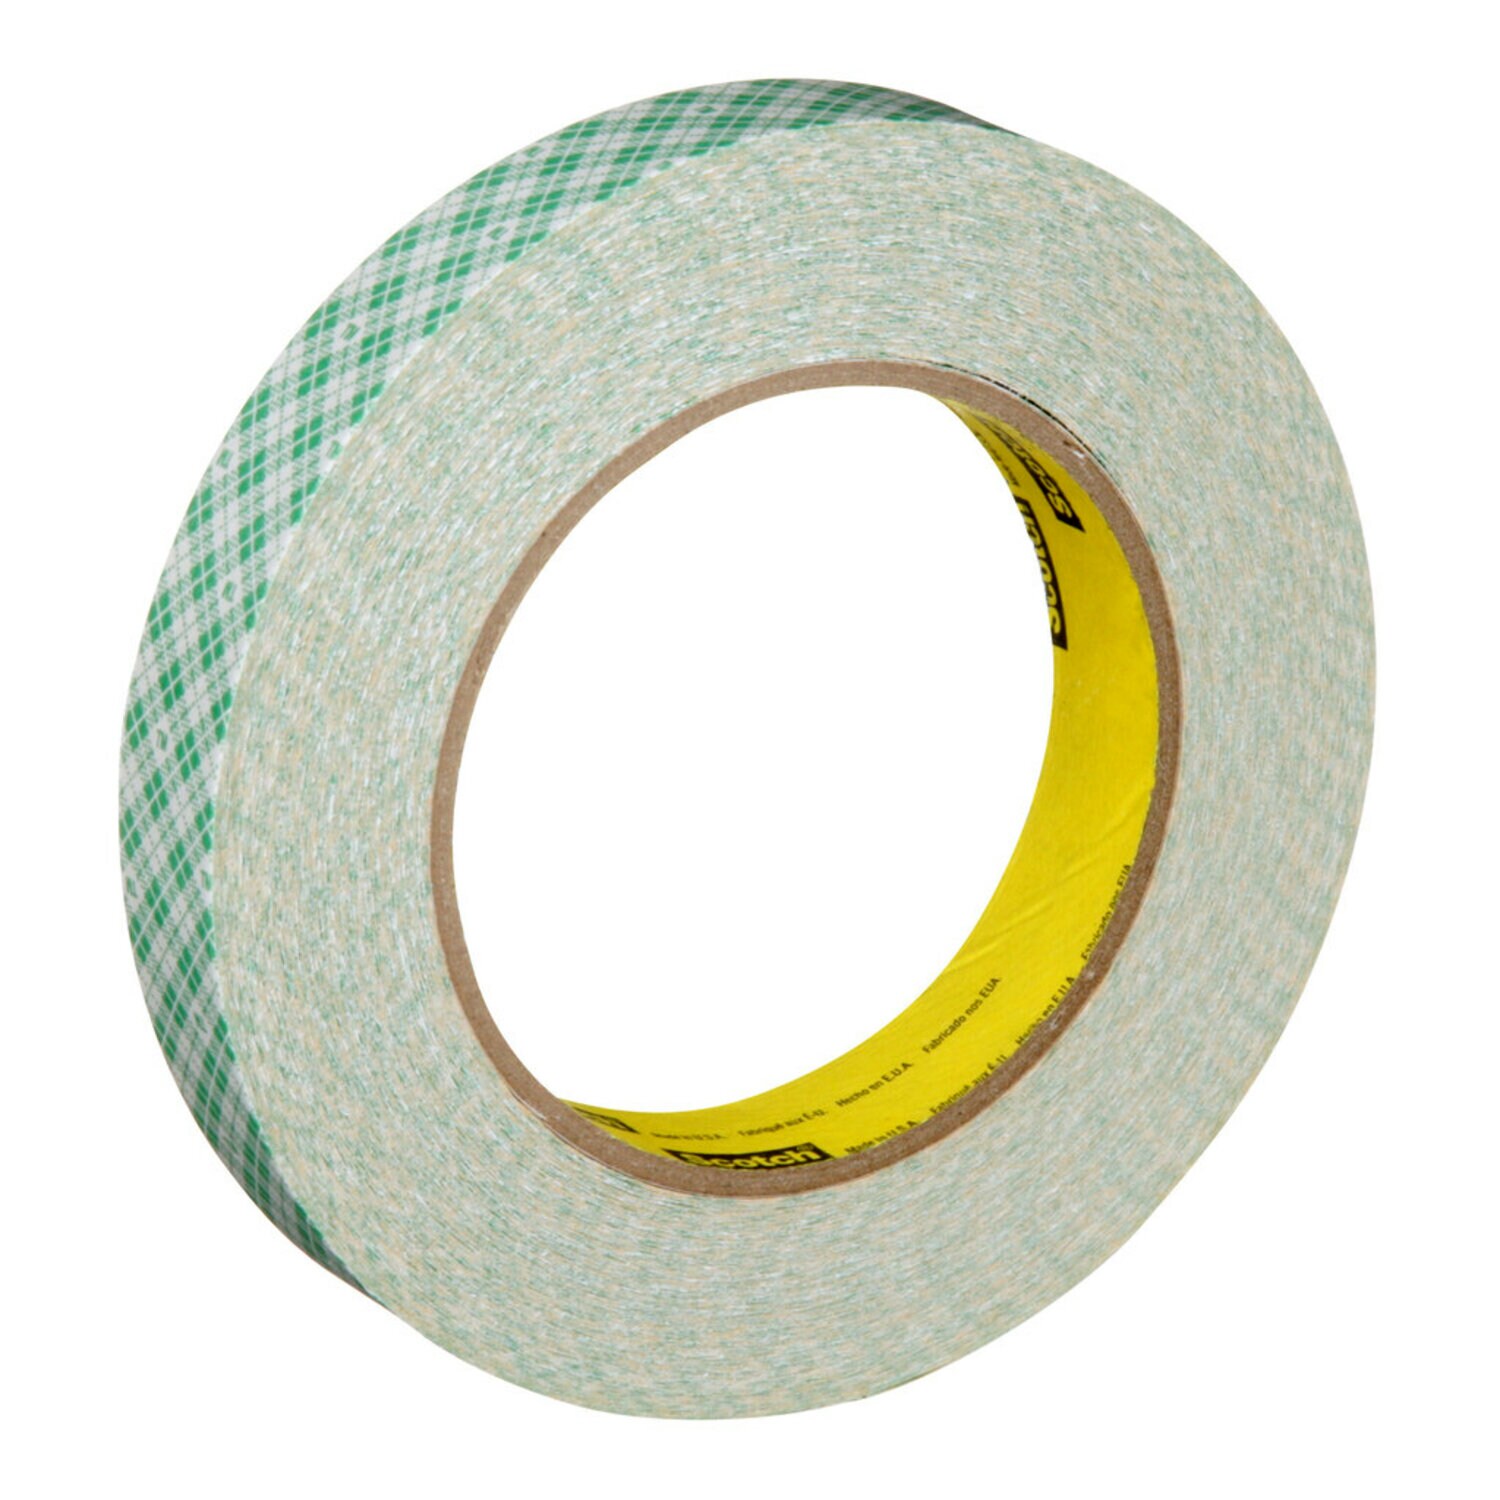 7000049313 - 3M Double Coated Paper Tape 410M, Natural, 3/4 in x 36 yd, 5 mil, 48
rolls per case